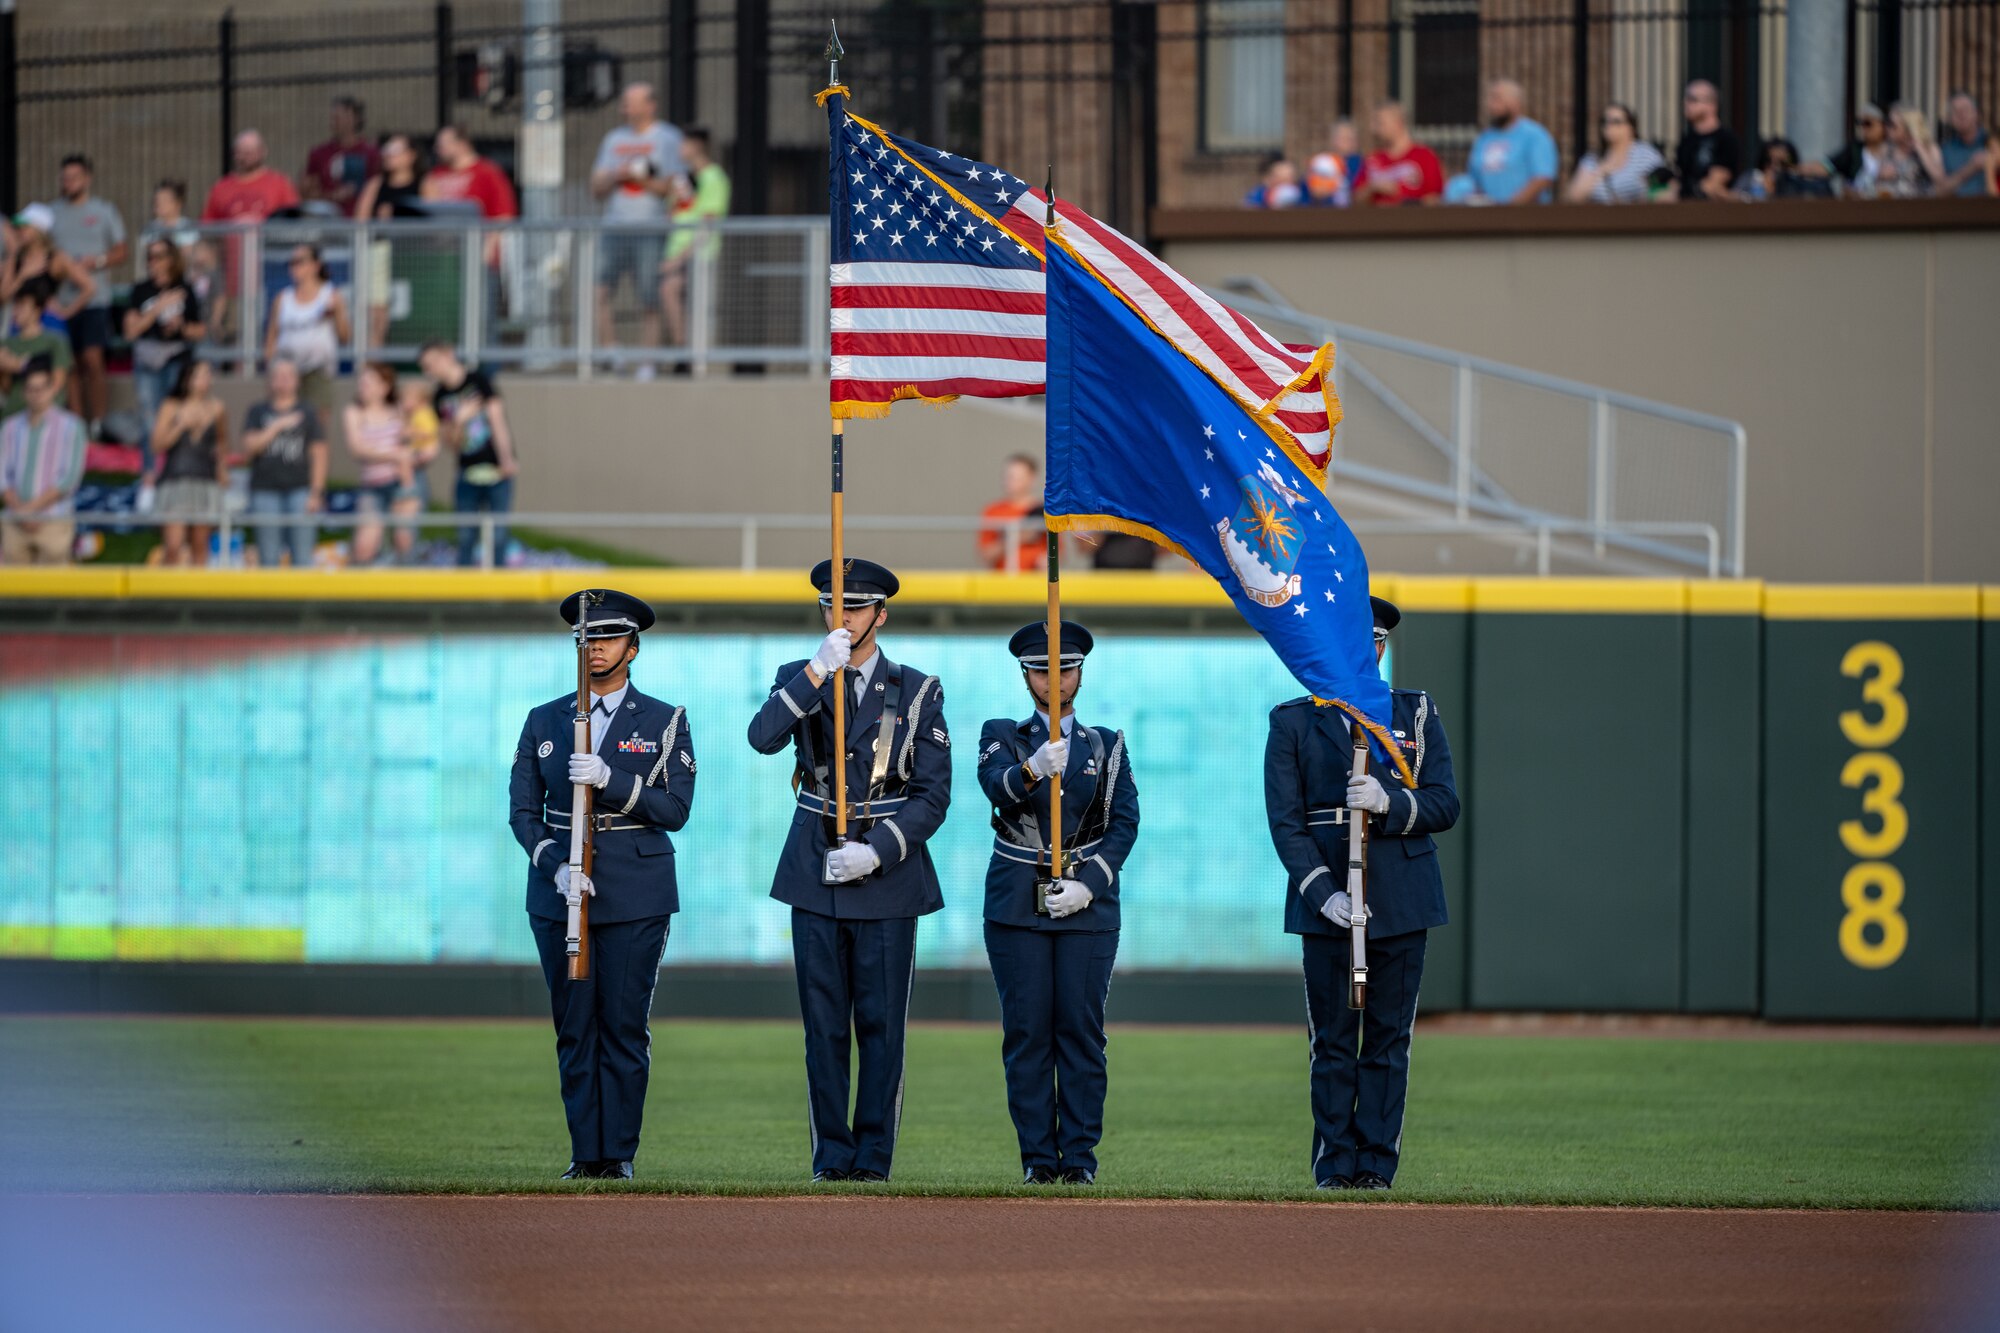 WPAFB Honor Guard present the colors during the National Anthem.